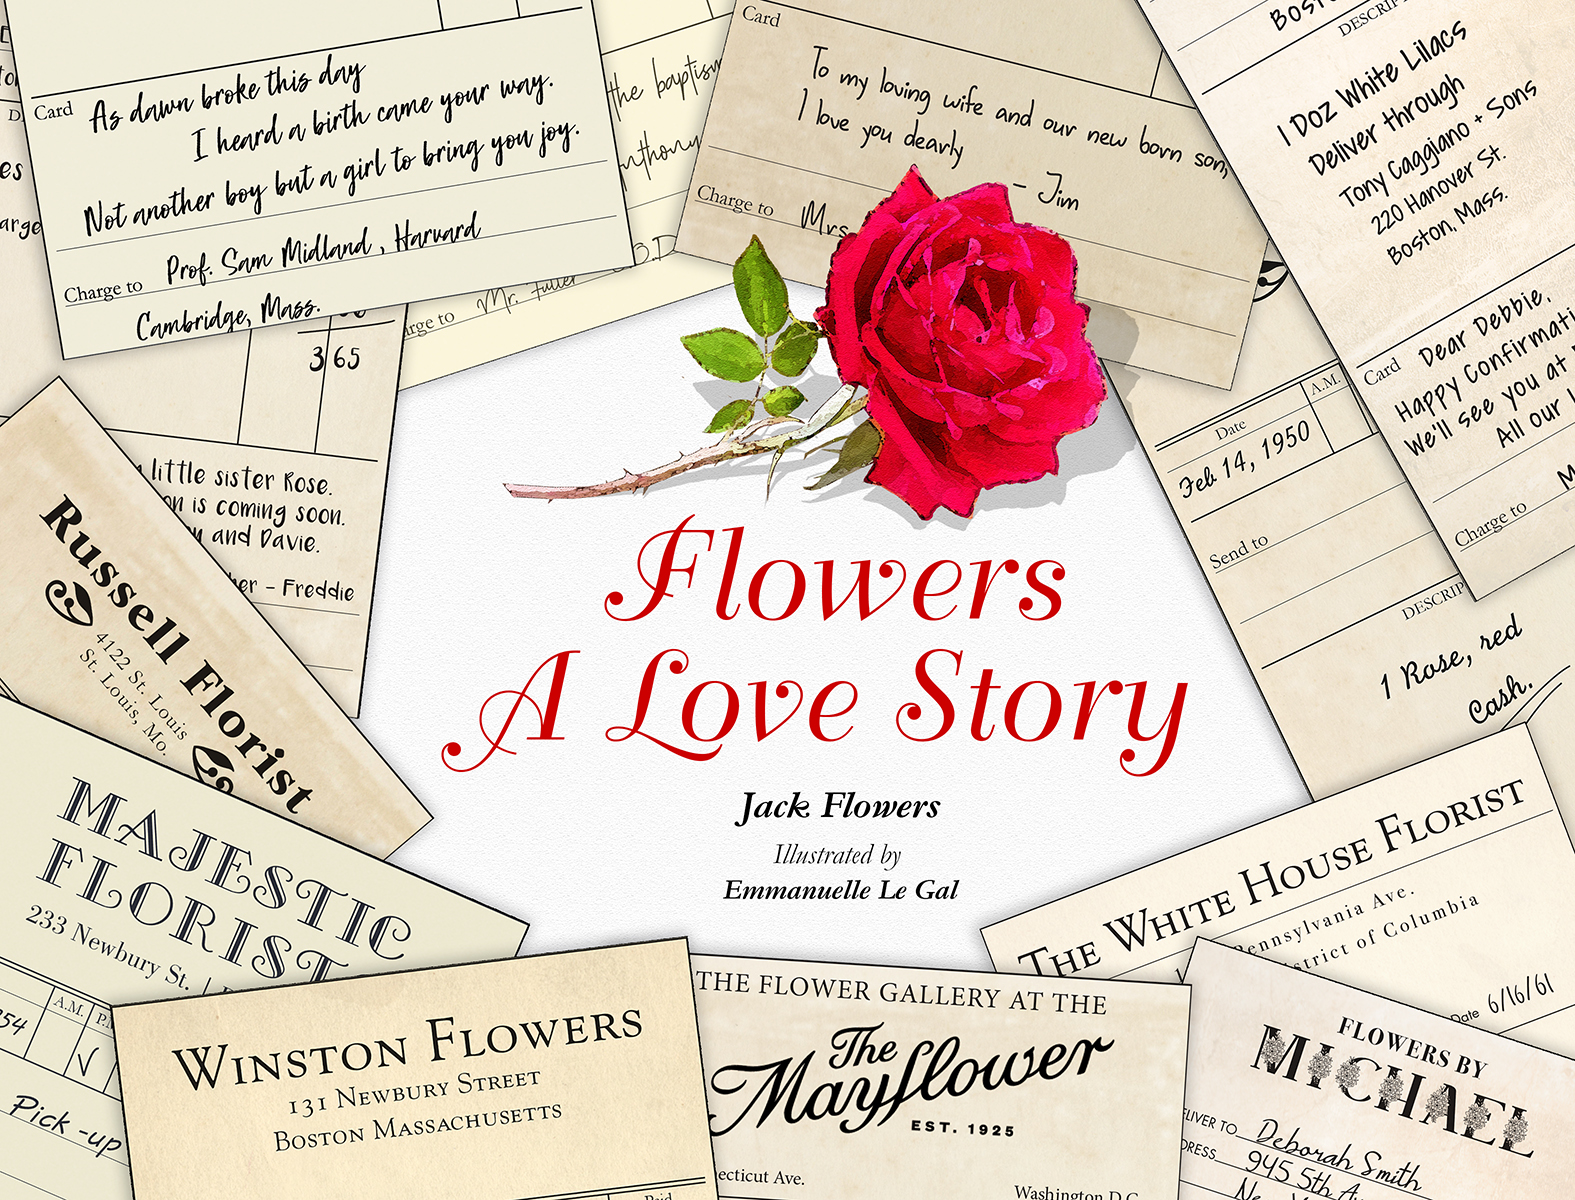 Fowers, a Love Story by Jack Flowers